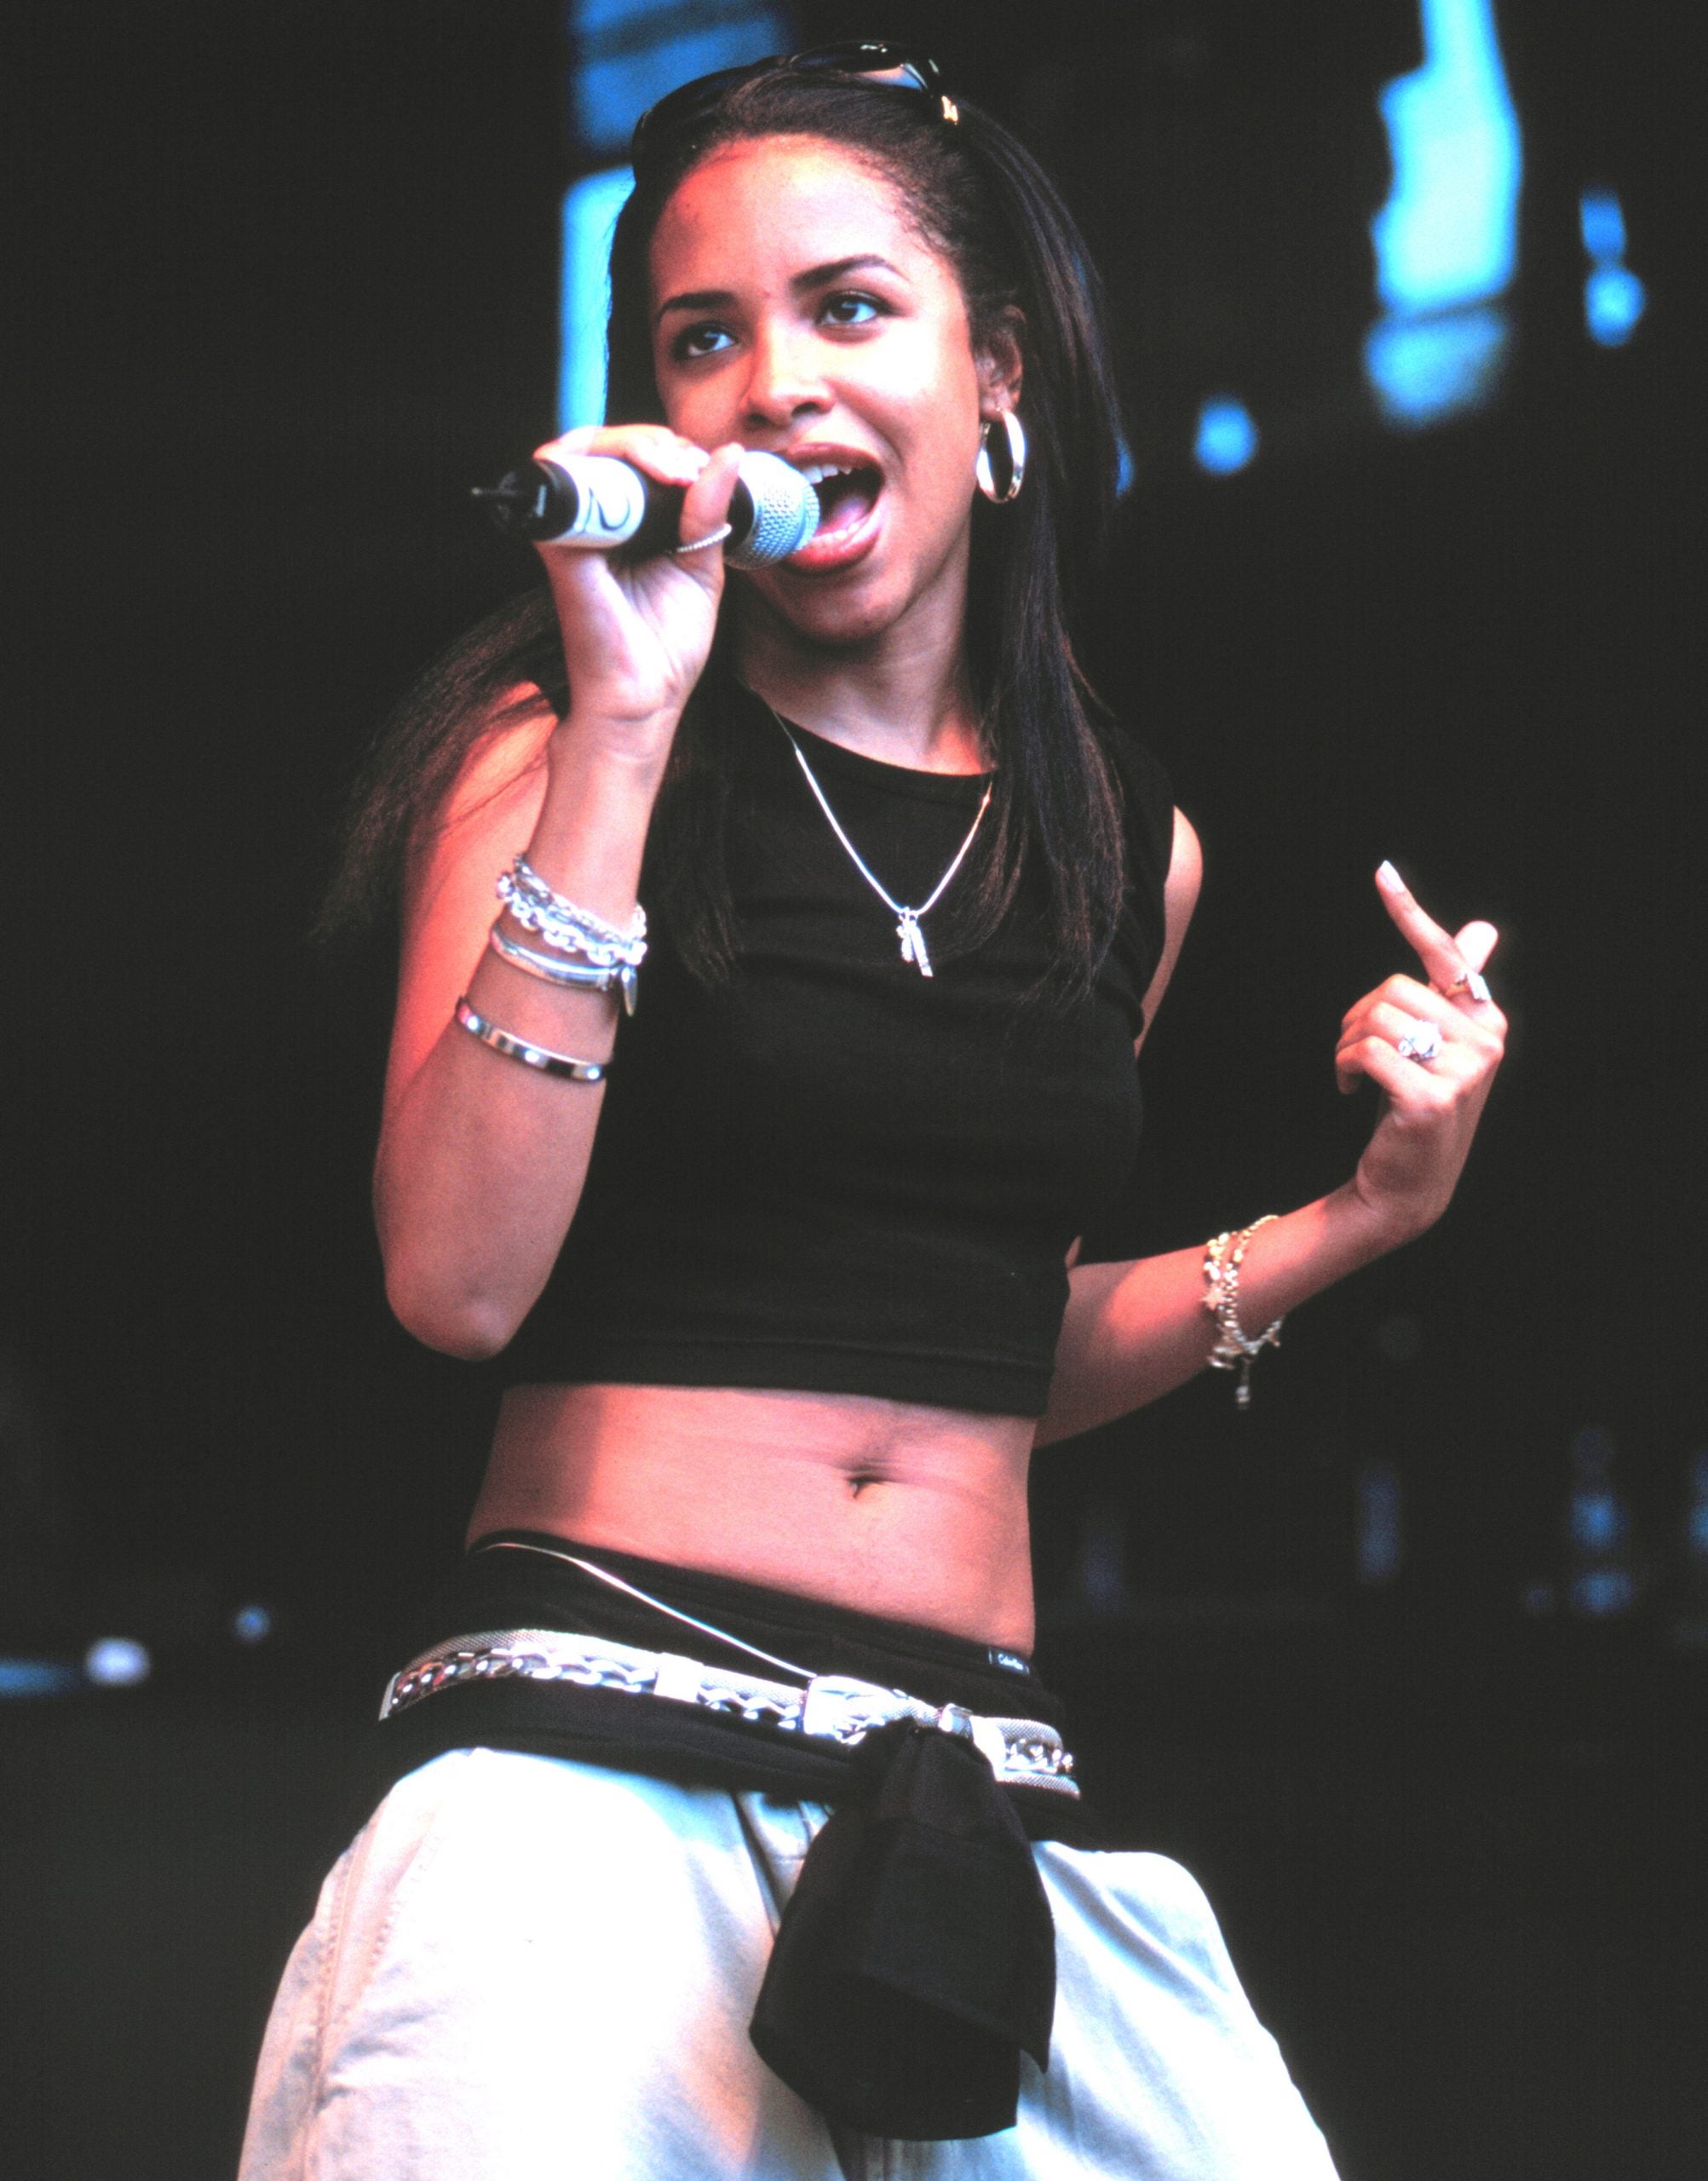 12 Aaliyah Songs We Can't Wait To Hear On Streaming Services